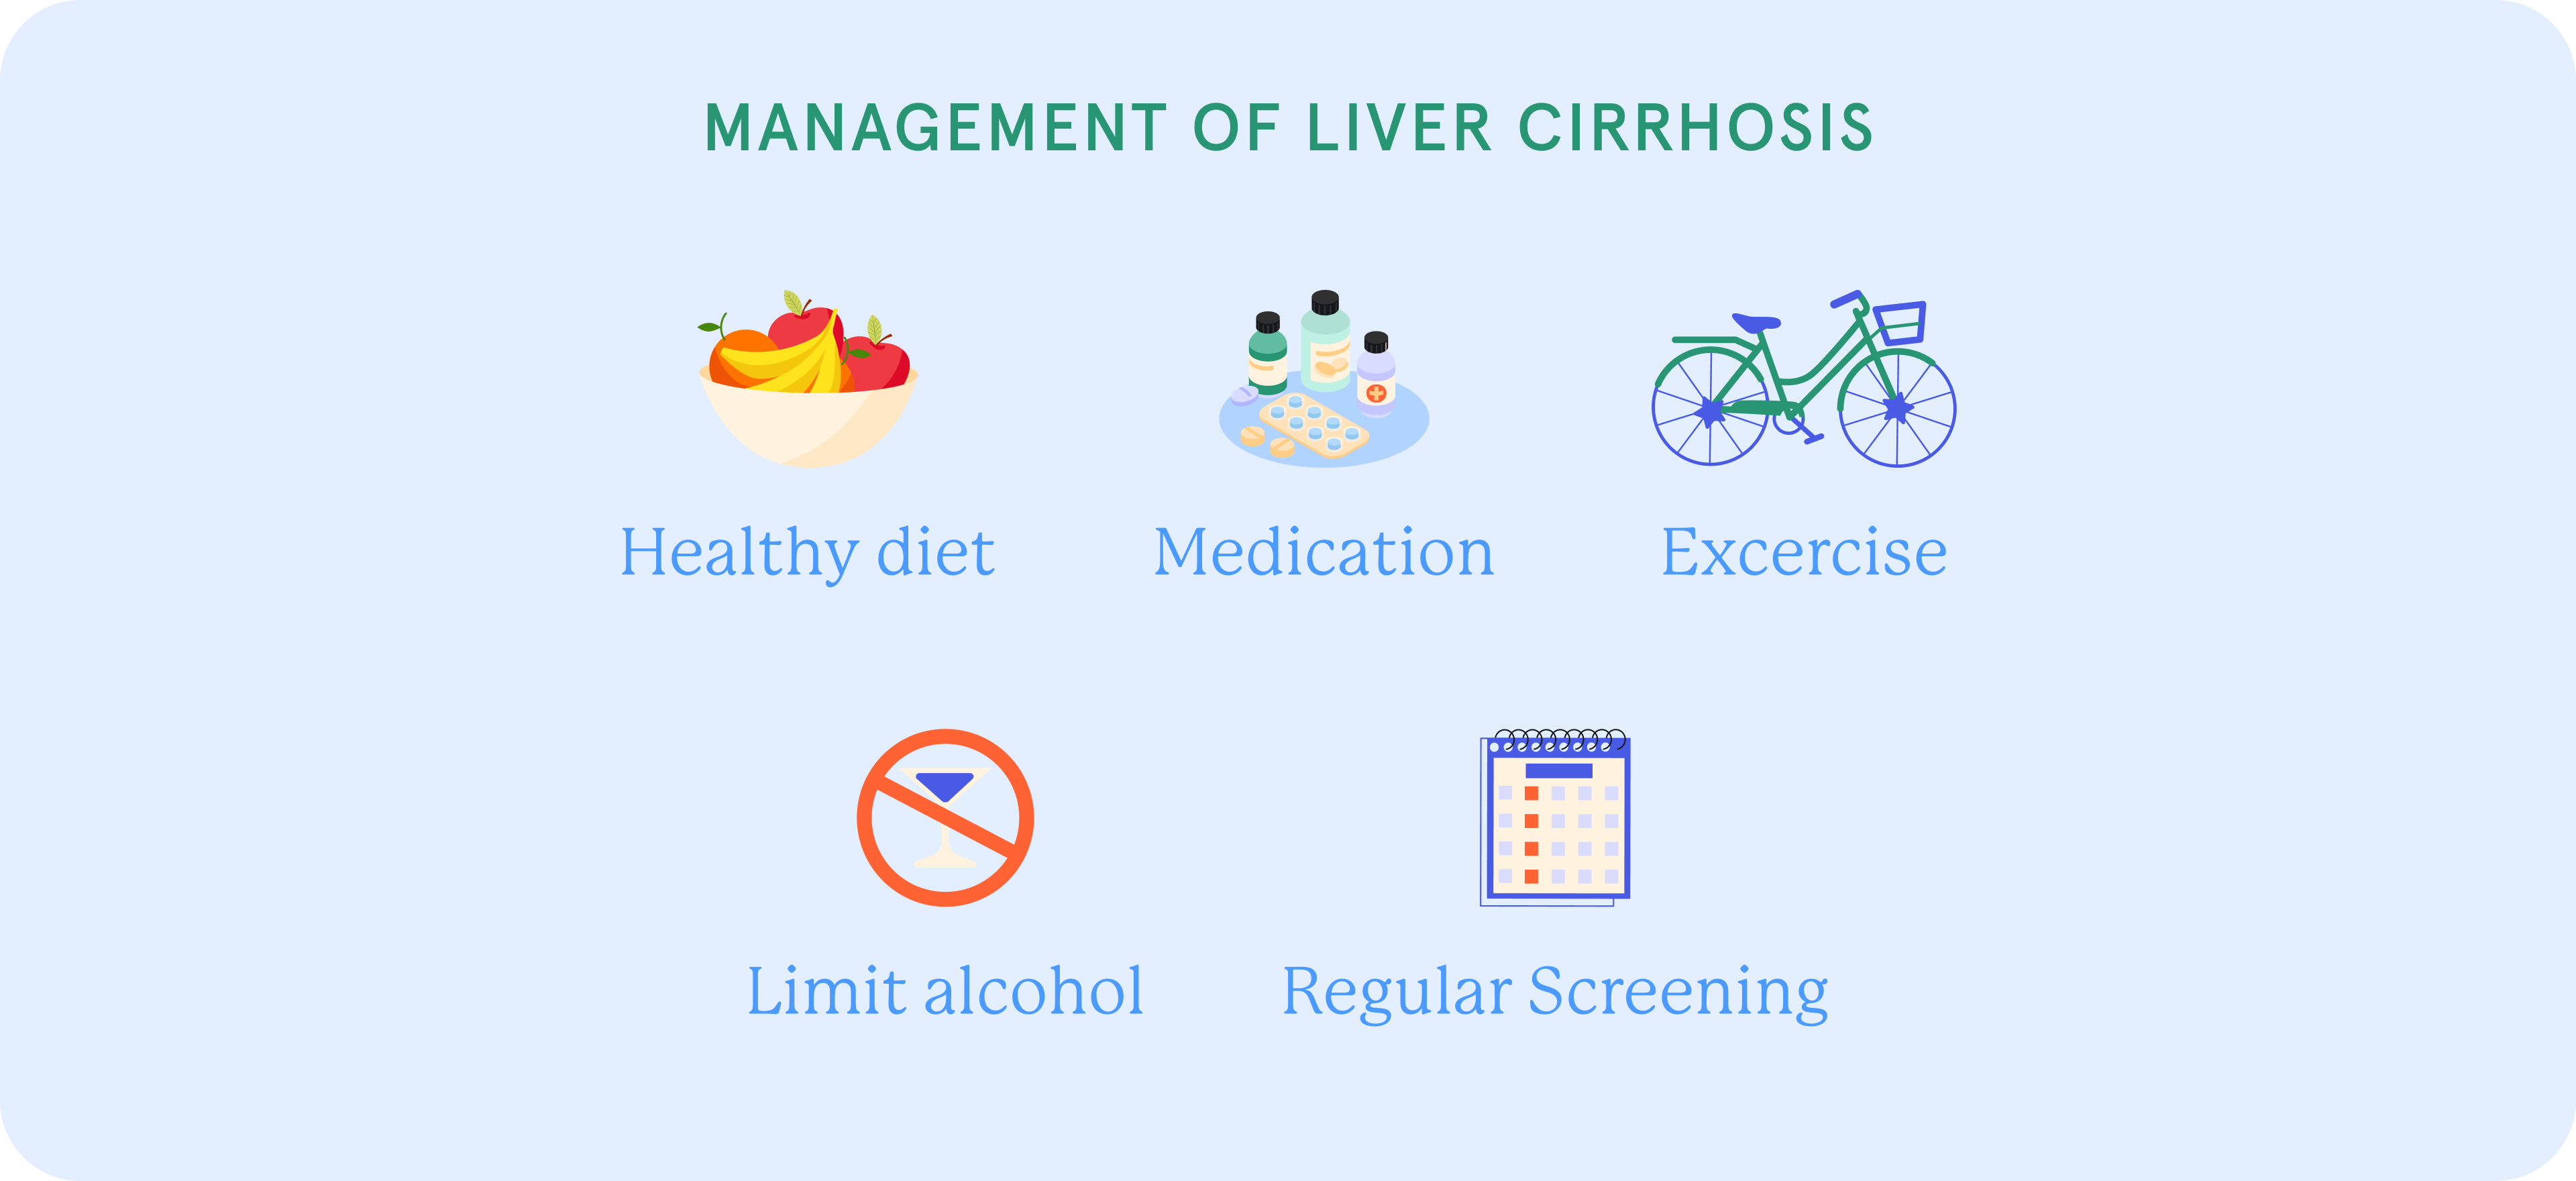 A diagram depicting the various strategies for managing liver cirrhosis.